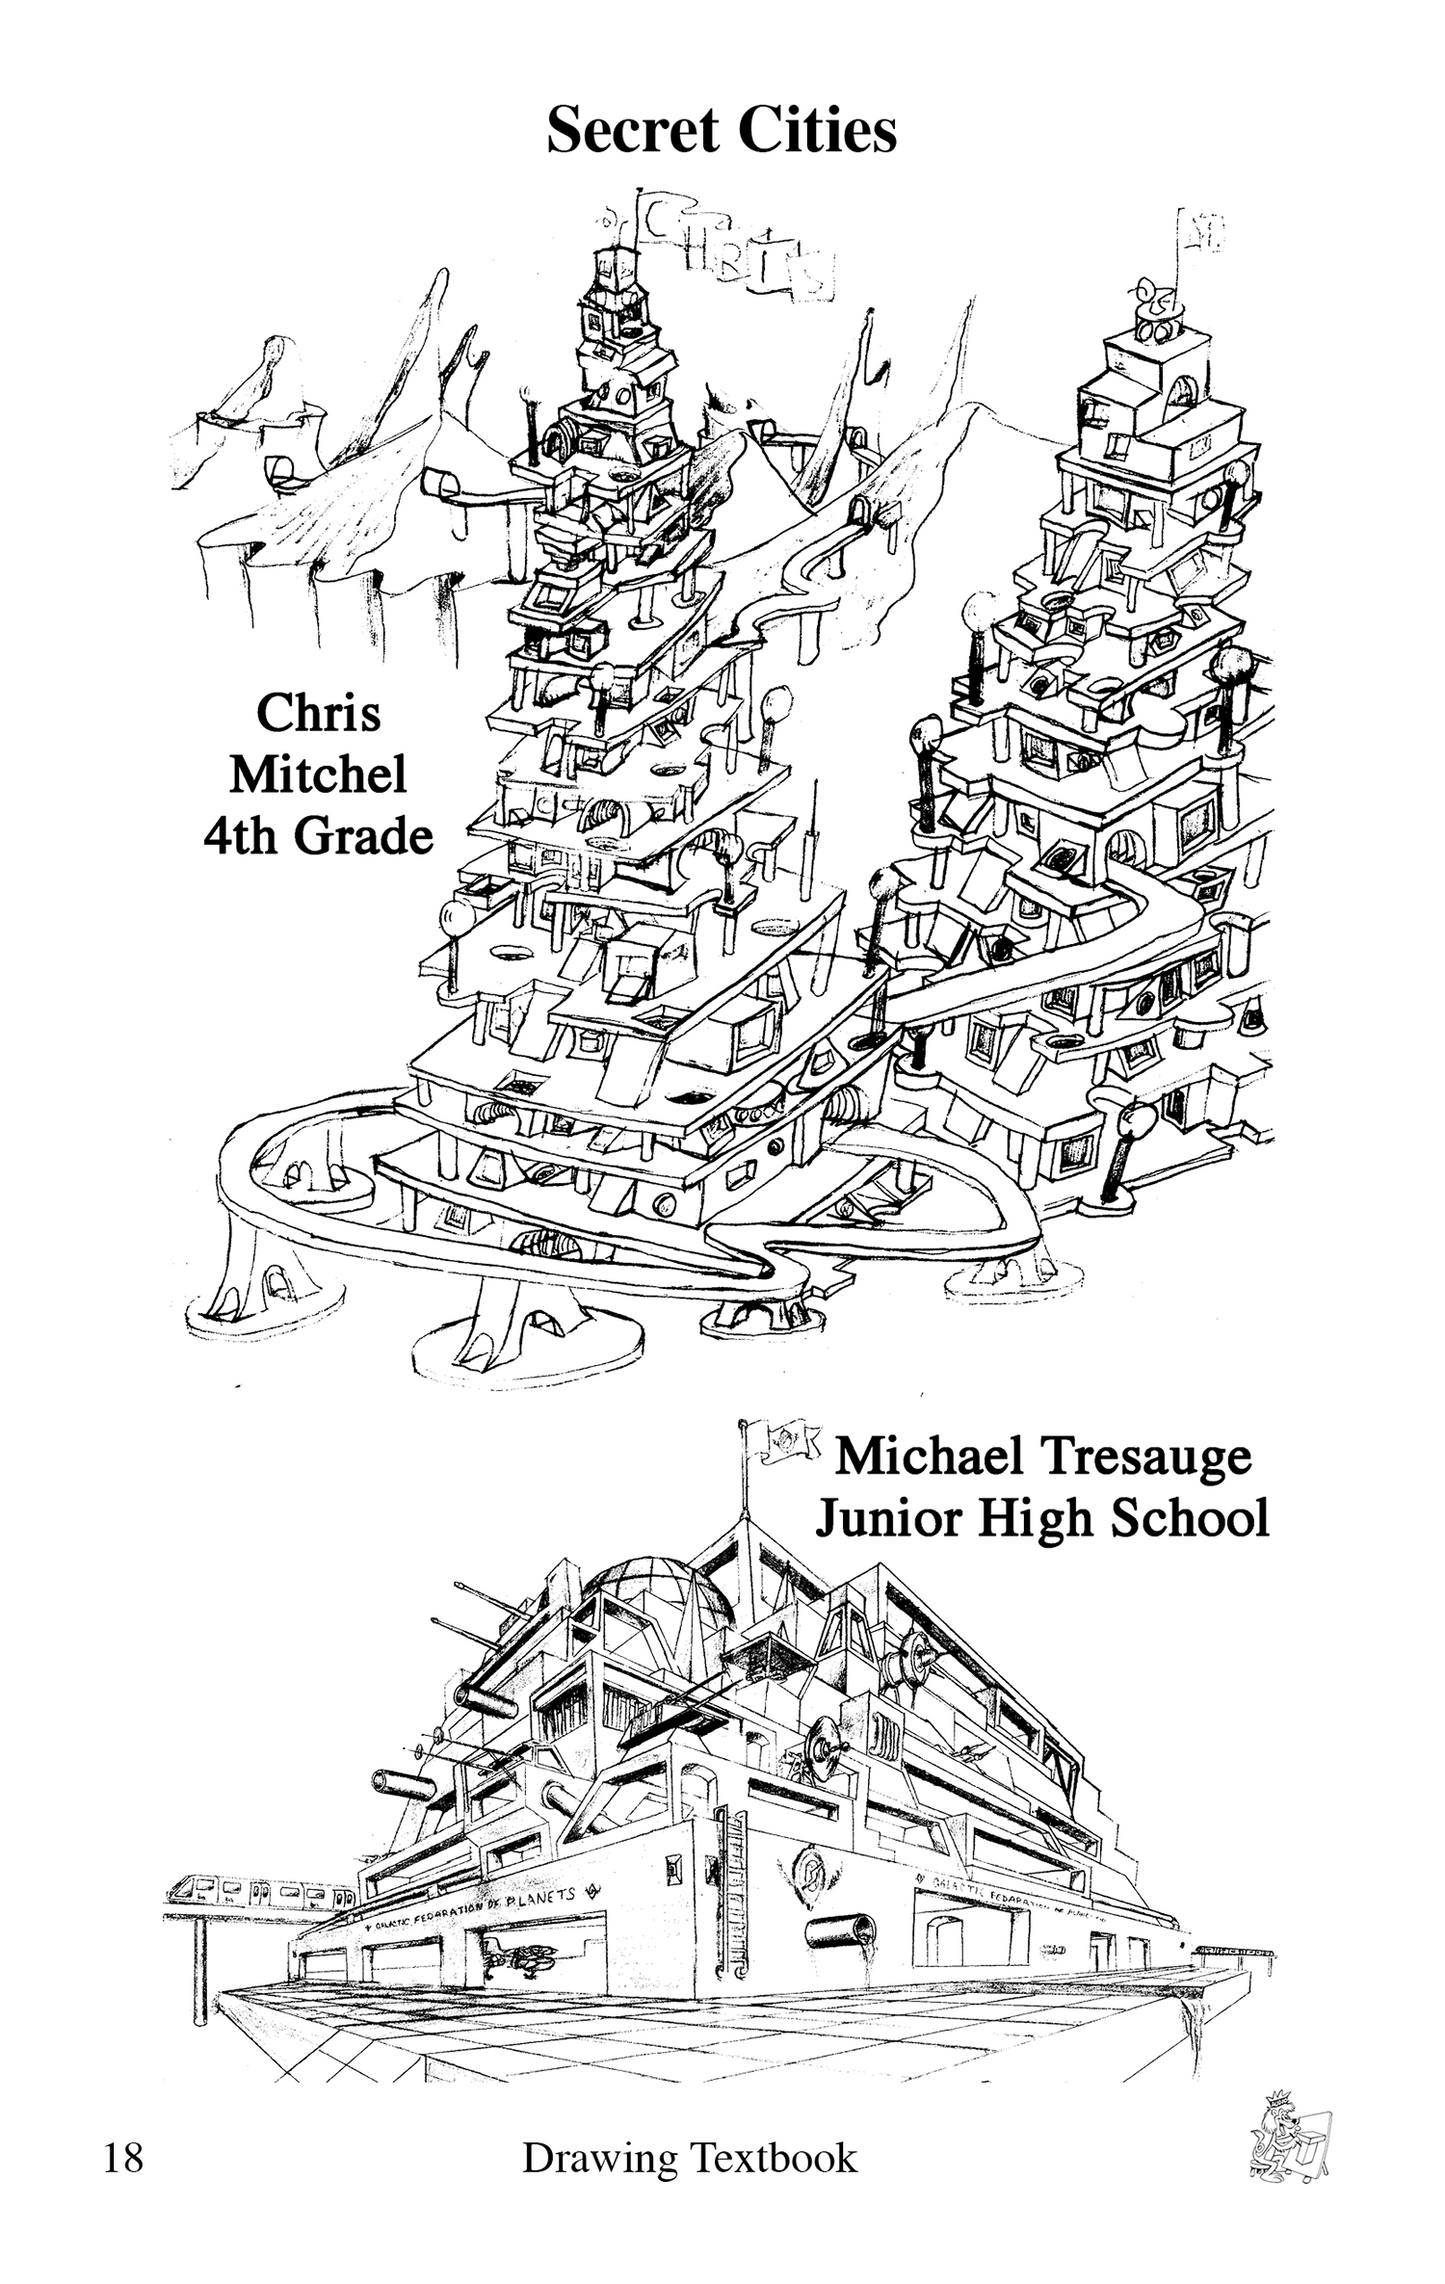 Secret Cities page from Drawing Textbook by Bruce McIntyre